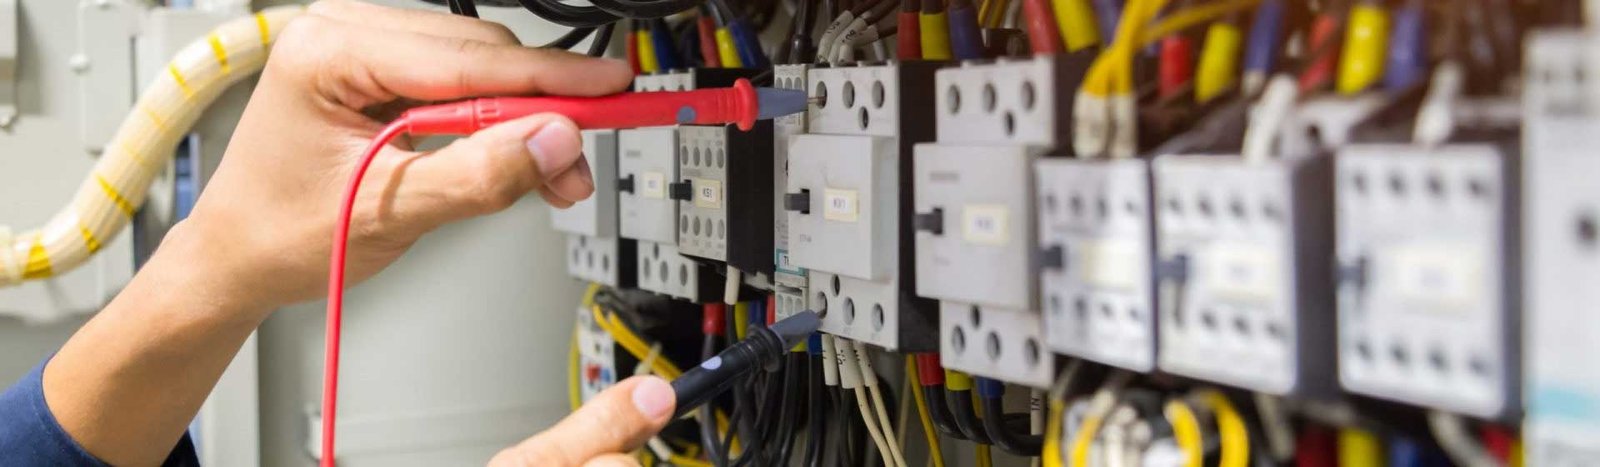 registered electrical contractor